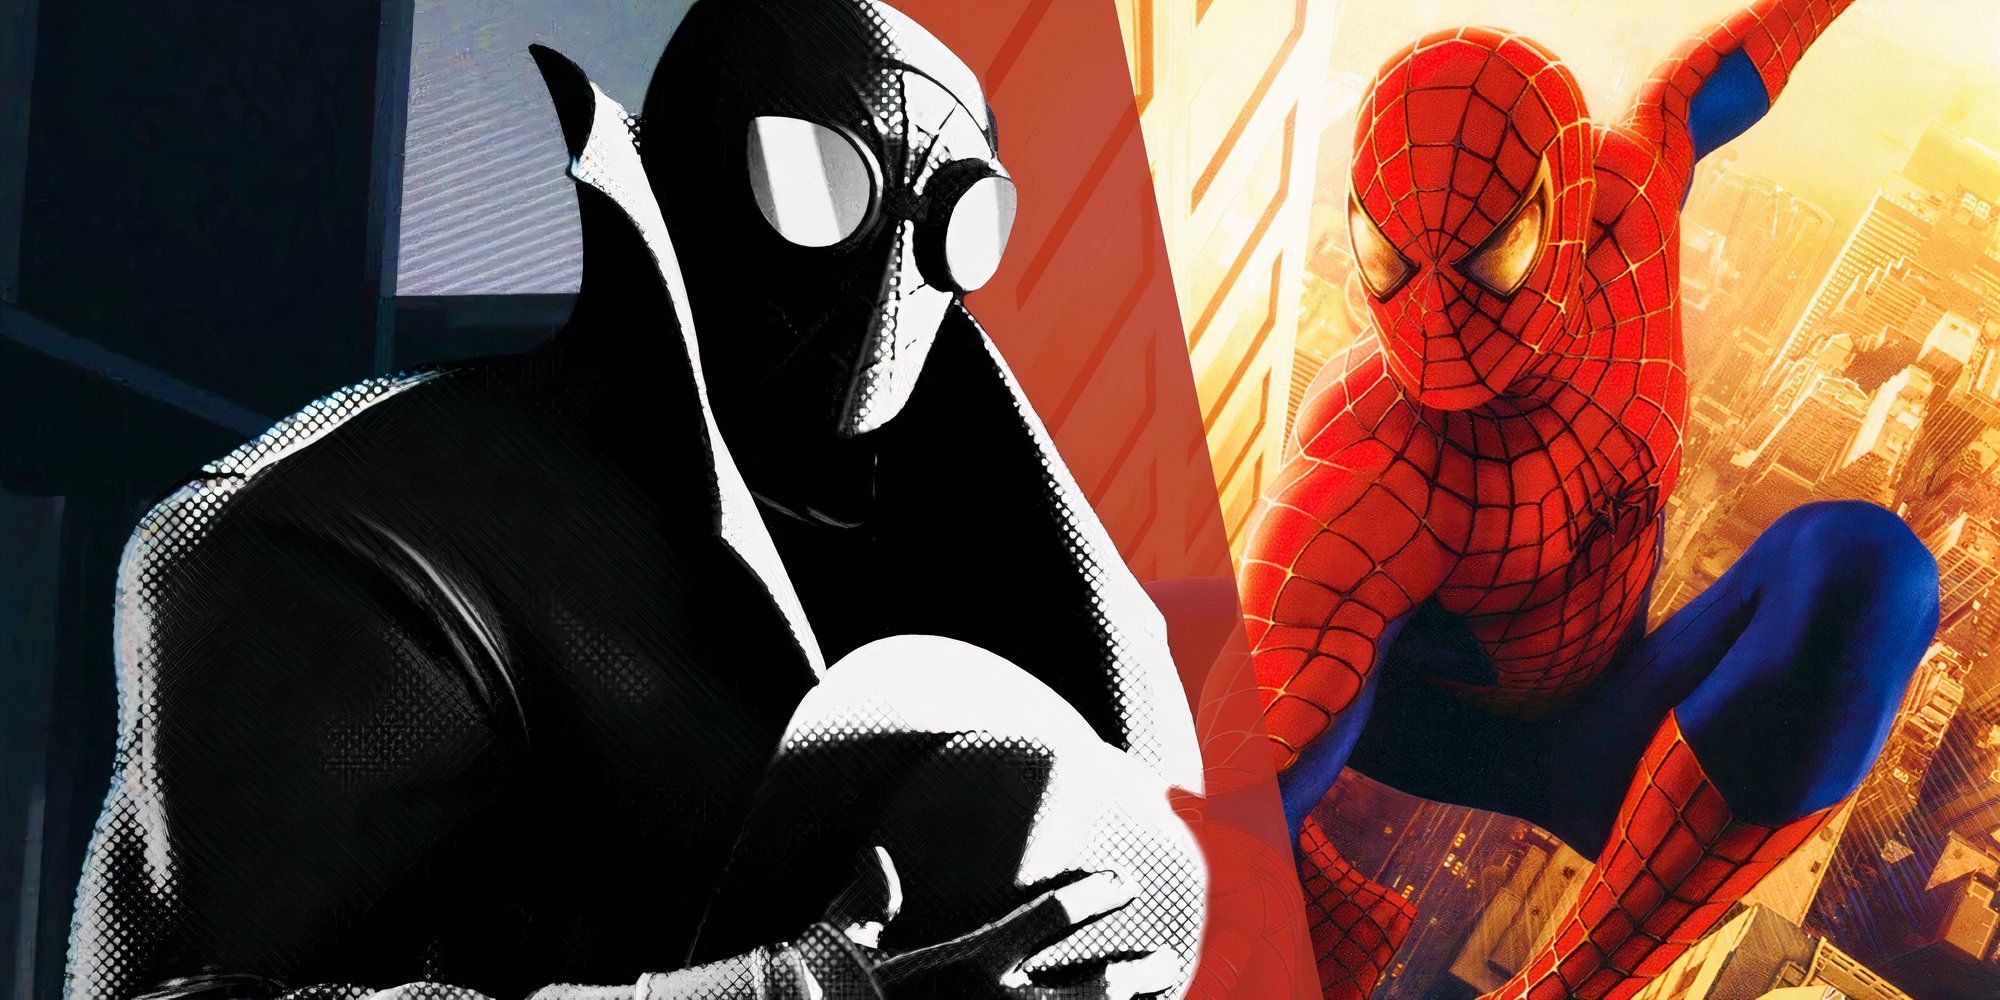 Spider-Man Noir holding his hat to his chest in Spider-Man: Into the Spider-Verse (2018) next to the poster for Spider-Man (2002) showing Tobey Maguire's character web-swinging